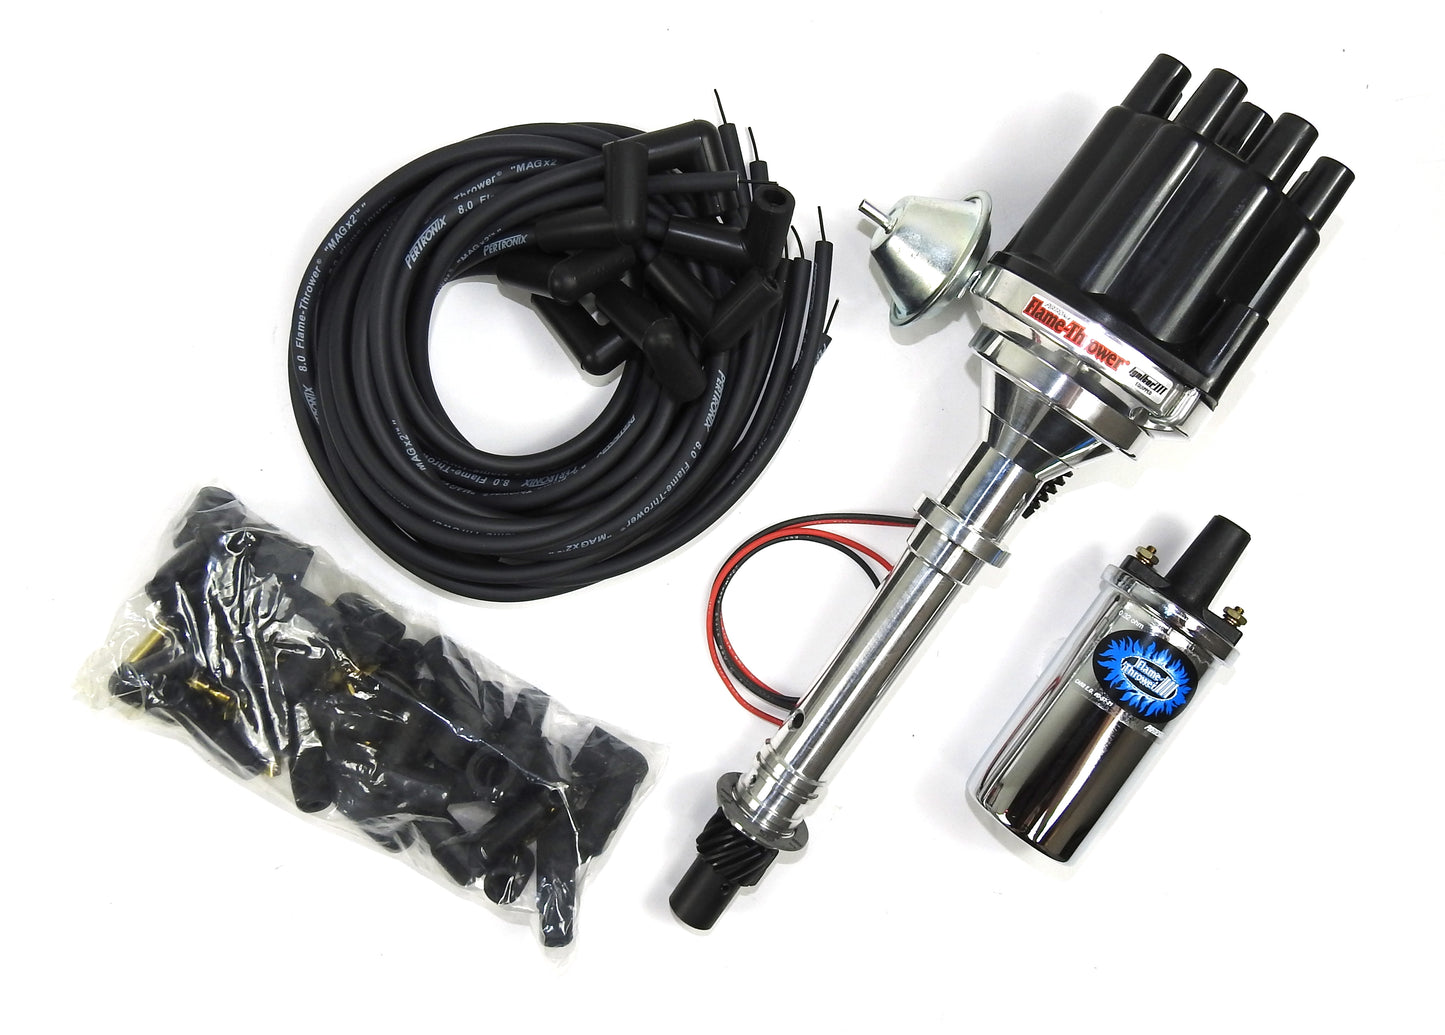 Pertronix Bundle003 Ignition Kit includes Chevy SB/BB Billet Plug n Play Ignitor 3 Distributor with Black Female Cap, Flame-Thrower III Chrome Coil, Flame-Thrower MAGx2 Universal Black Spark Plug Wires with 90 degree plug boot ends